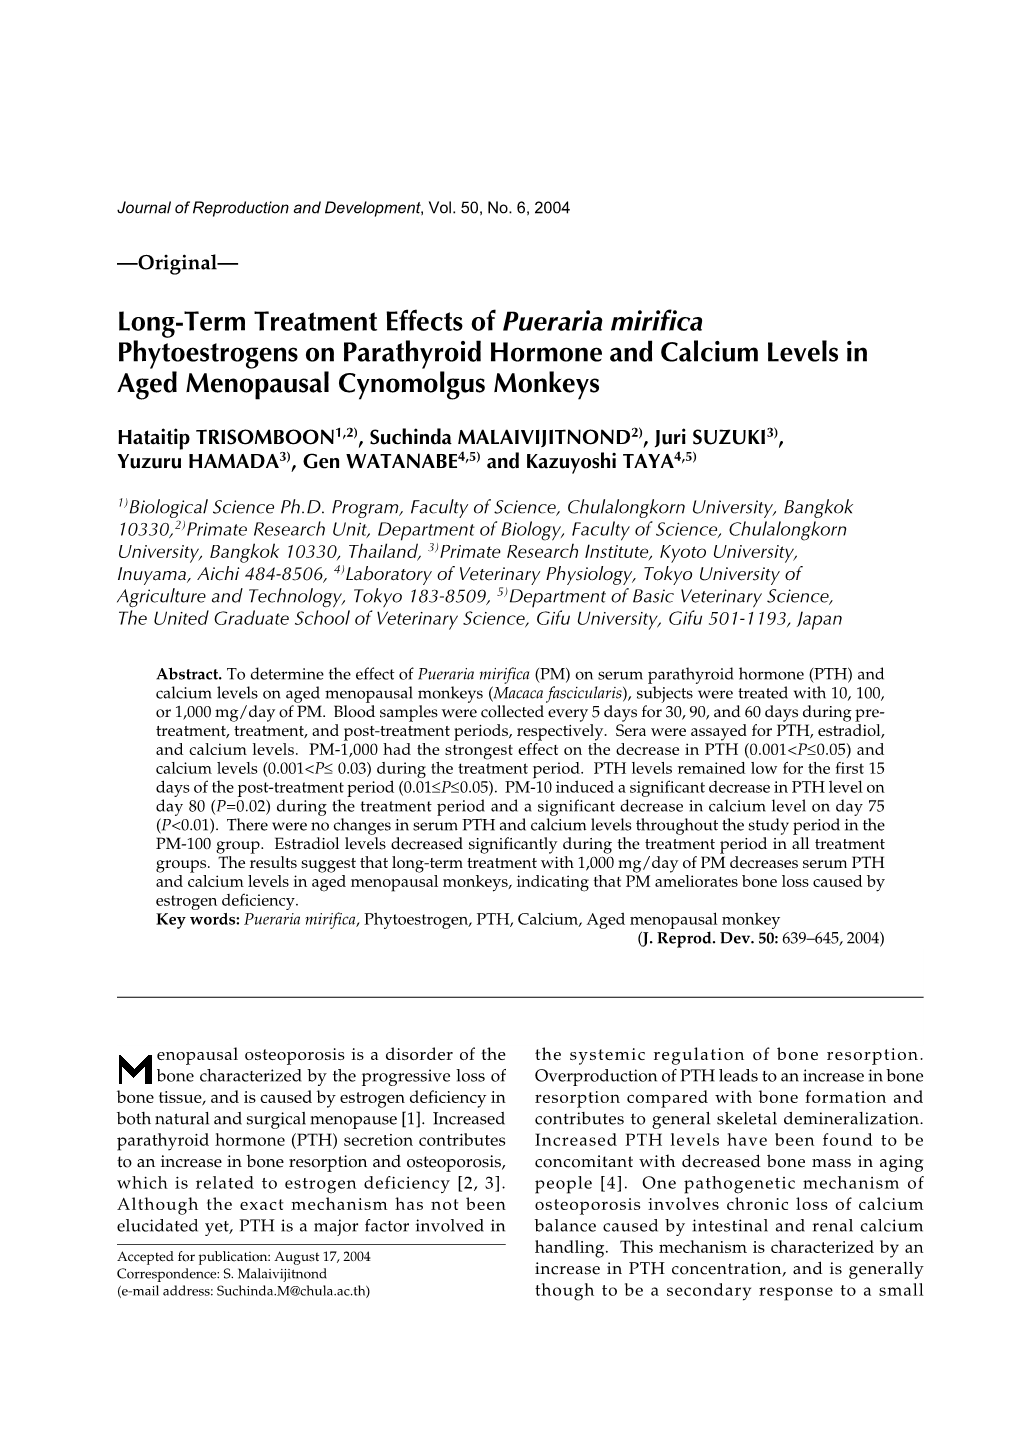 Long-Term Treatment Effects of Pueraria Mirifica Phytoestrogens on Parathyroid Hormone and Calcium Levels in Aged Menopausal Cynomolgus Monkeys